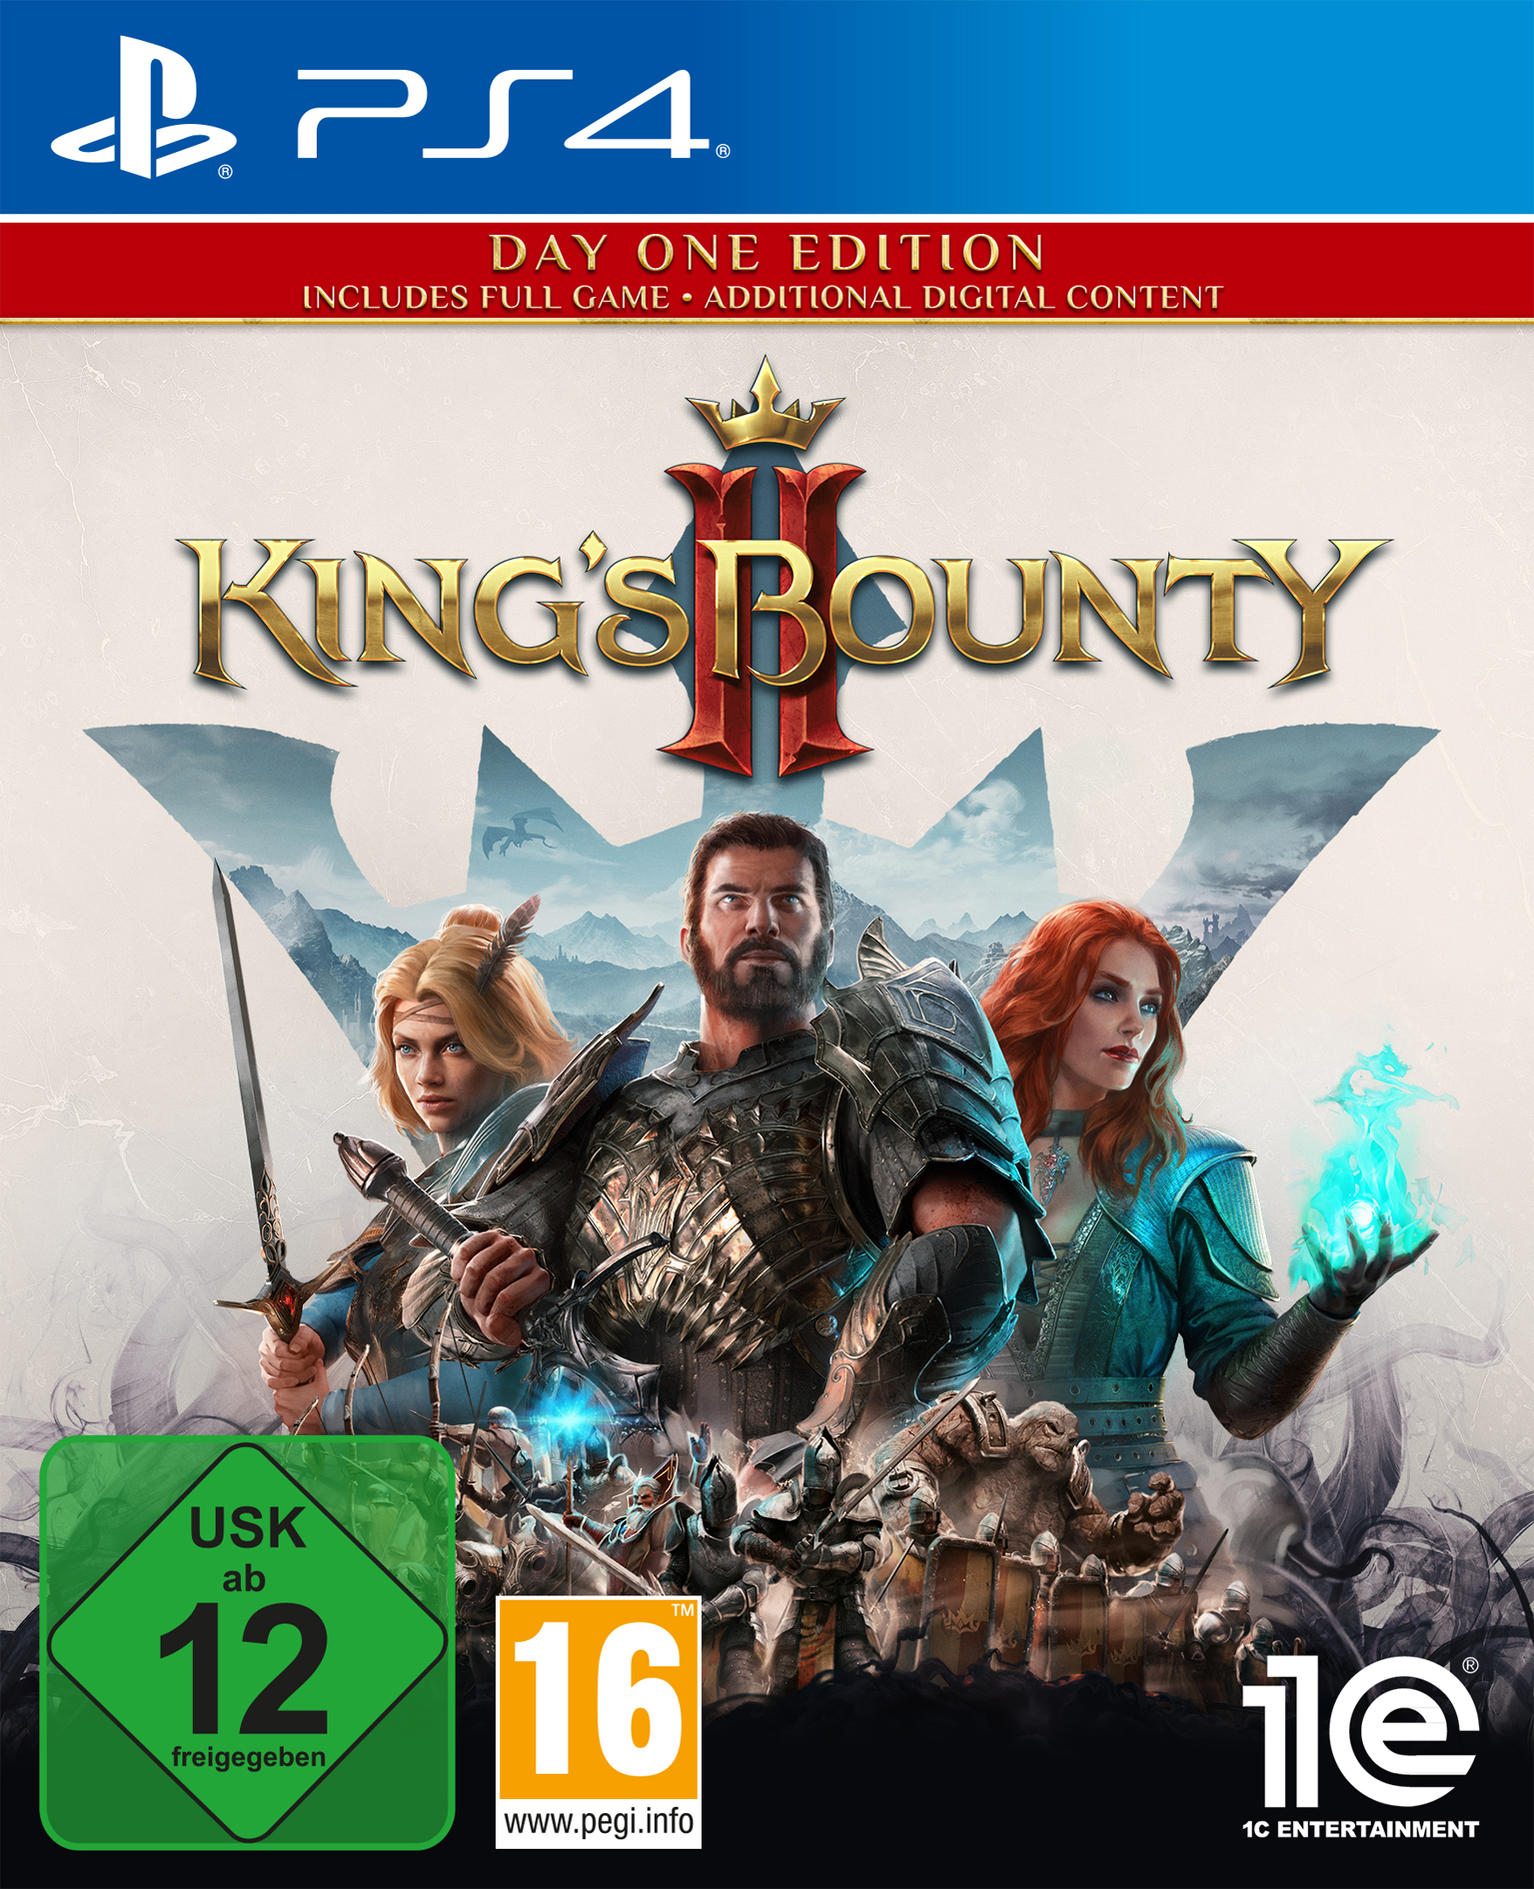 DAY - BOUNTY KINGS [PlayStation 4] ONE II EDITION PS4